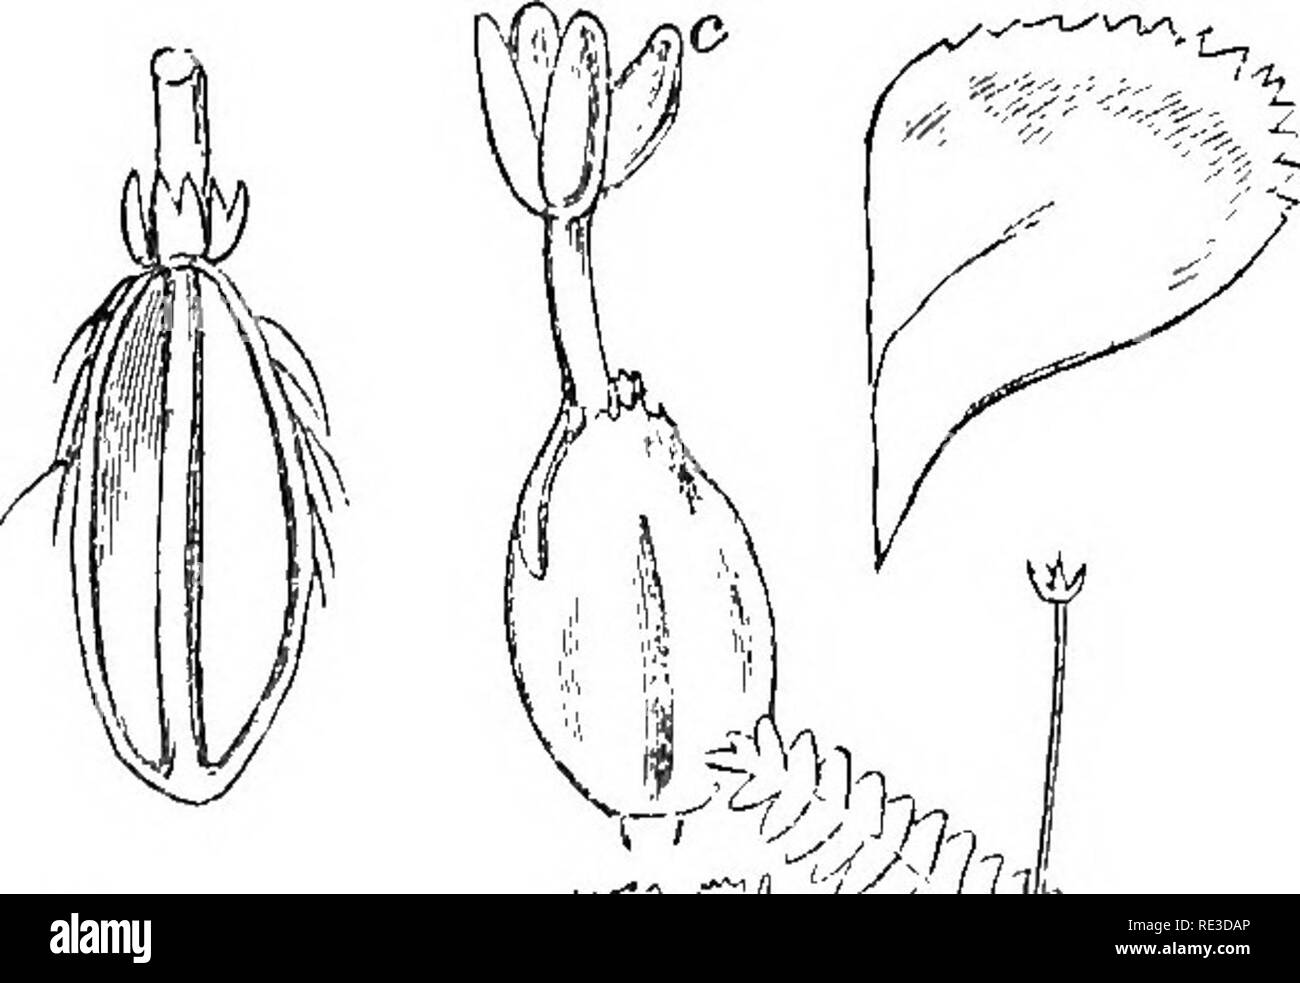 . Introduction to cryptogamic botany. Cryptogams. 458 INTRODUCTION TO CBTPTOGAMIC BOTANY. Trichomanis (Fig. 94, a) is a -well-known indigenous species, and forms a transition to the next group by its fleshy subter- raneous involucre. 13. Geocaltce^, Nees. Fruit immersed in a branchlet, or the saccate tip of the stem which is often fleshy; perianth wanting or confluent with the torus ; leaves succubous. 503. We come now to the division with succubous leaves. We have just had in Calypogeia a direct transition, in the absence of a perianth and the subterraneous involucre. All the species belong t Stock Photo